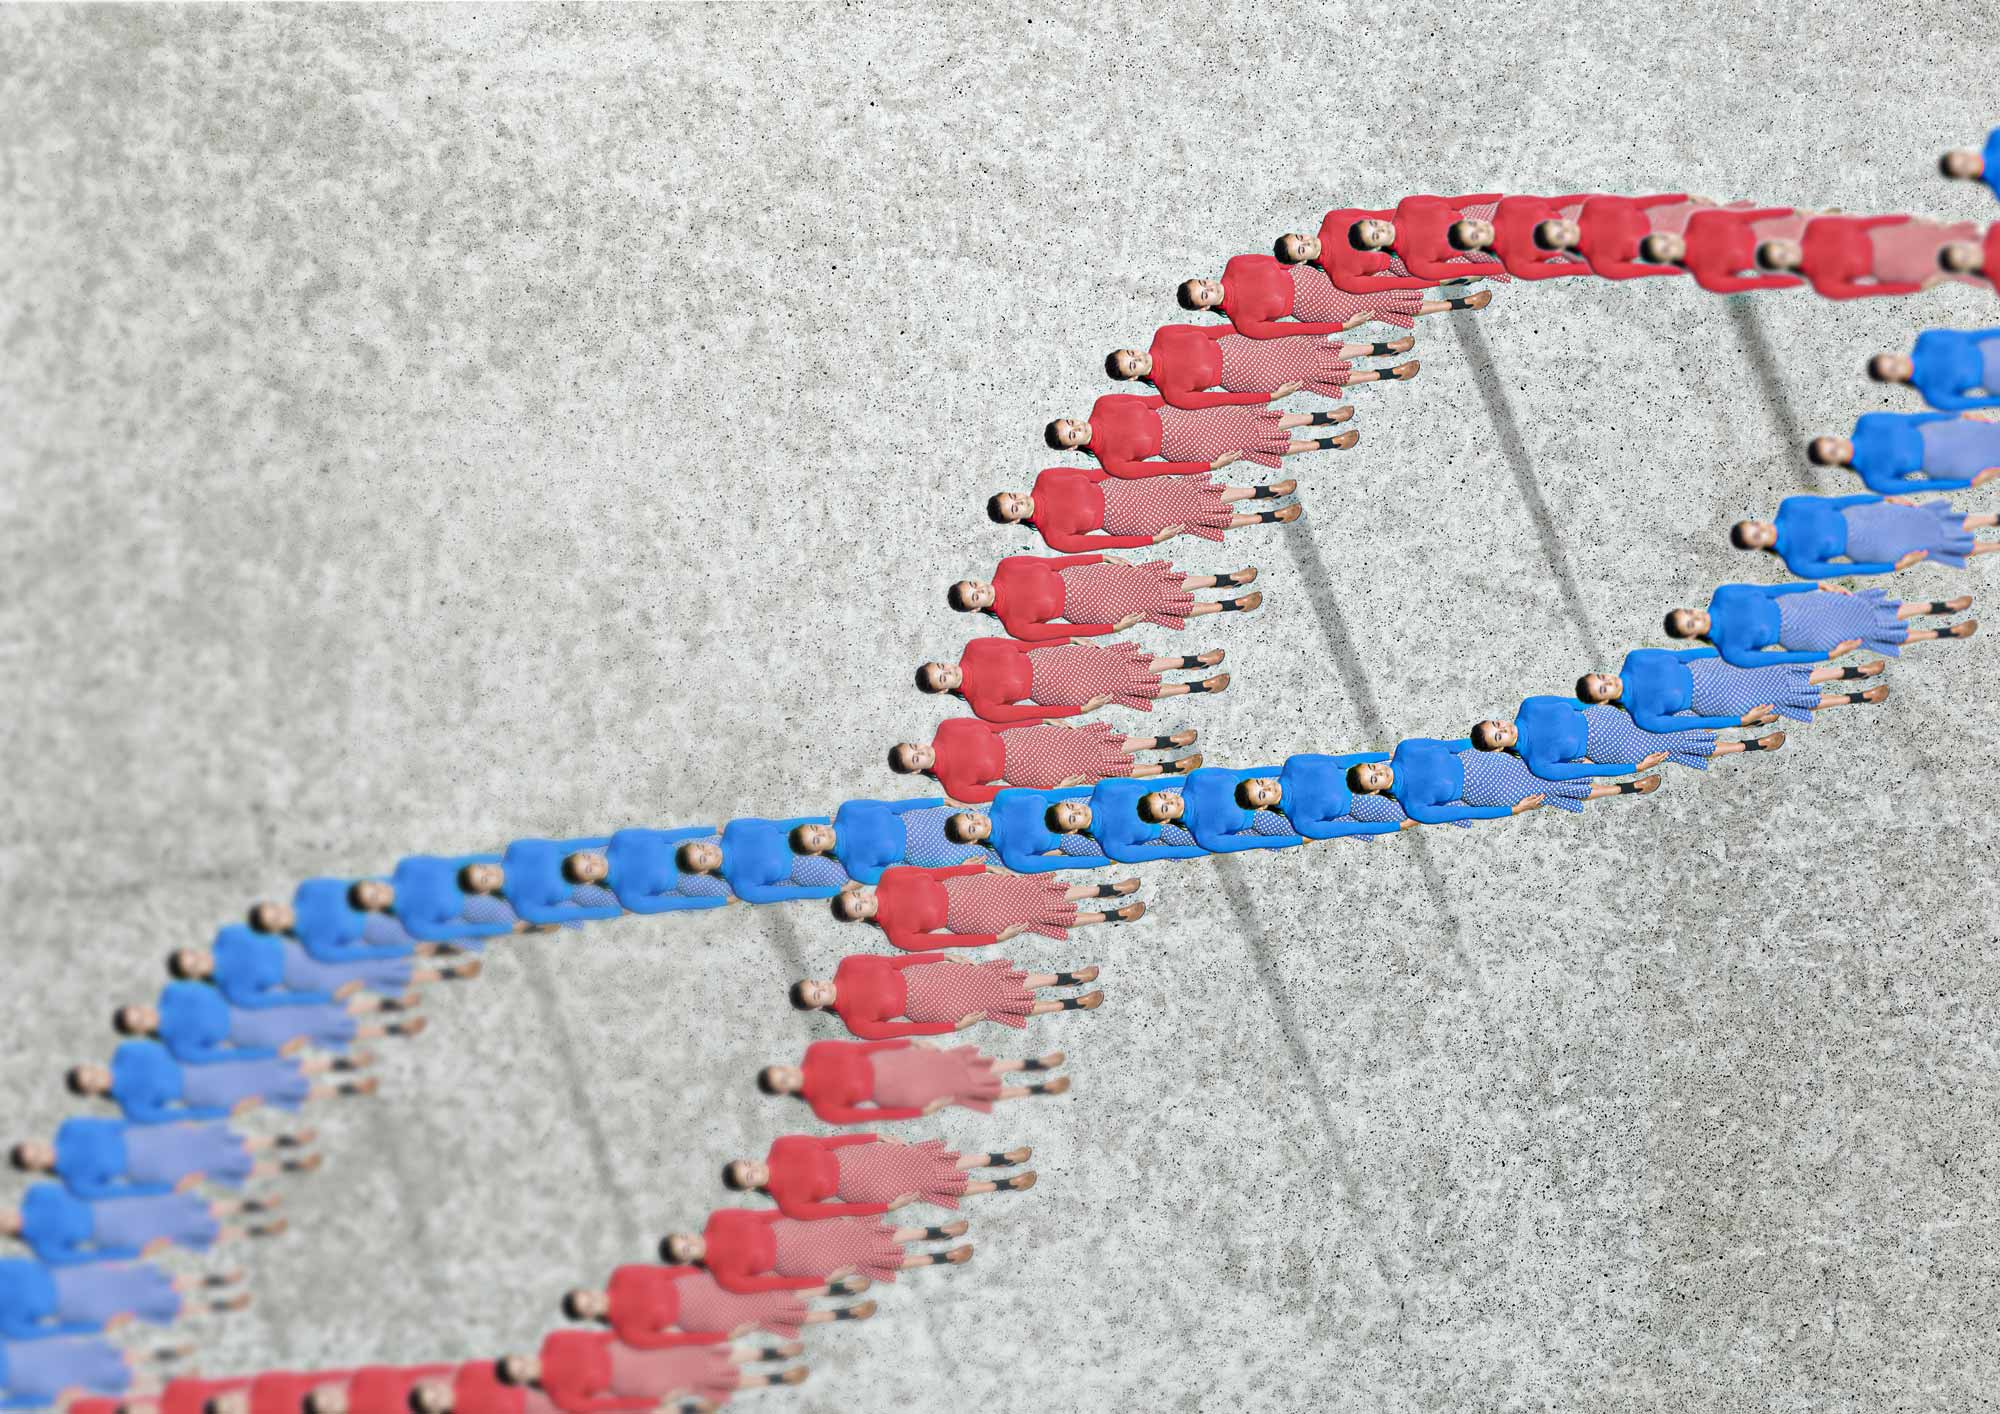 Abstract image of DNA